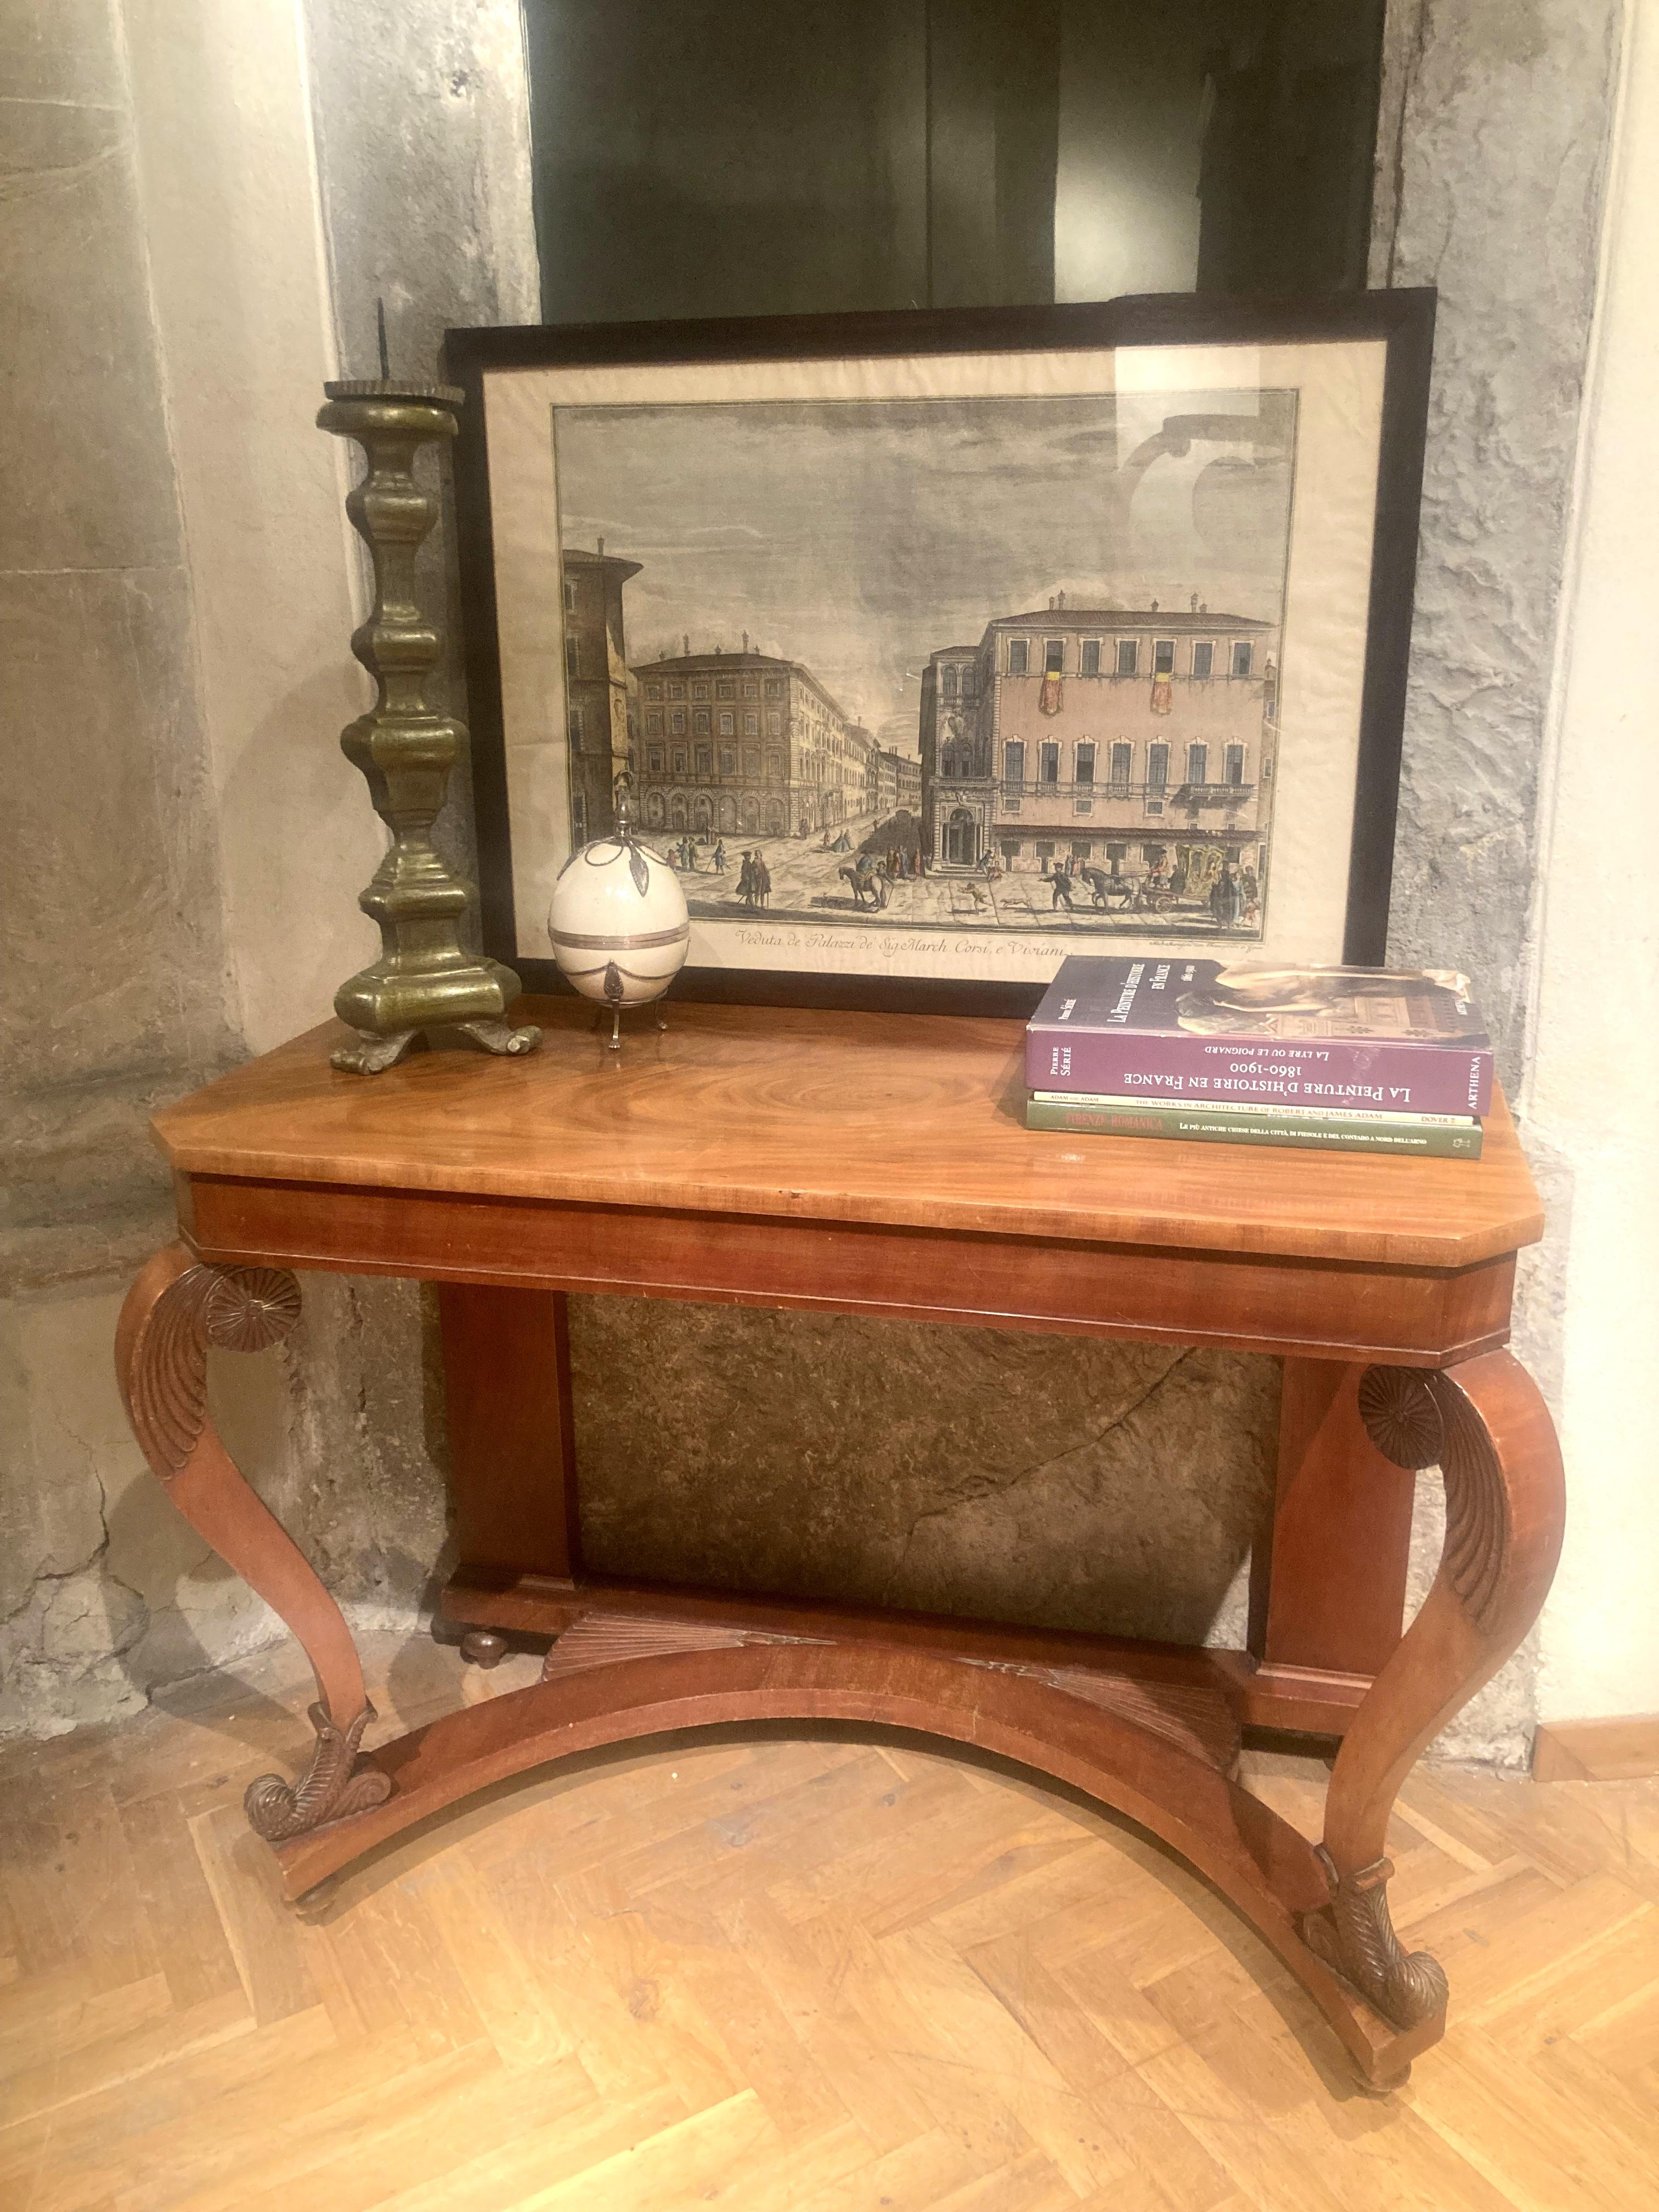 This Italian early 20th century cherrywood console table or writing desk is a fine Art Nouveau period piece of furniture. Its beautiful mellow honey colour and stylishly curved pillars supporting the wonderful chamfered edges tabletop will grace